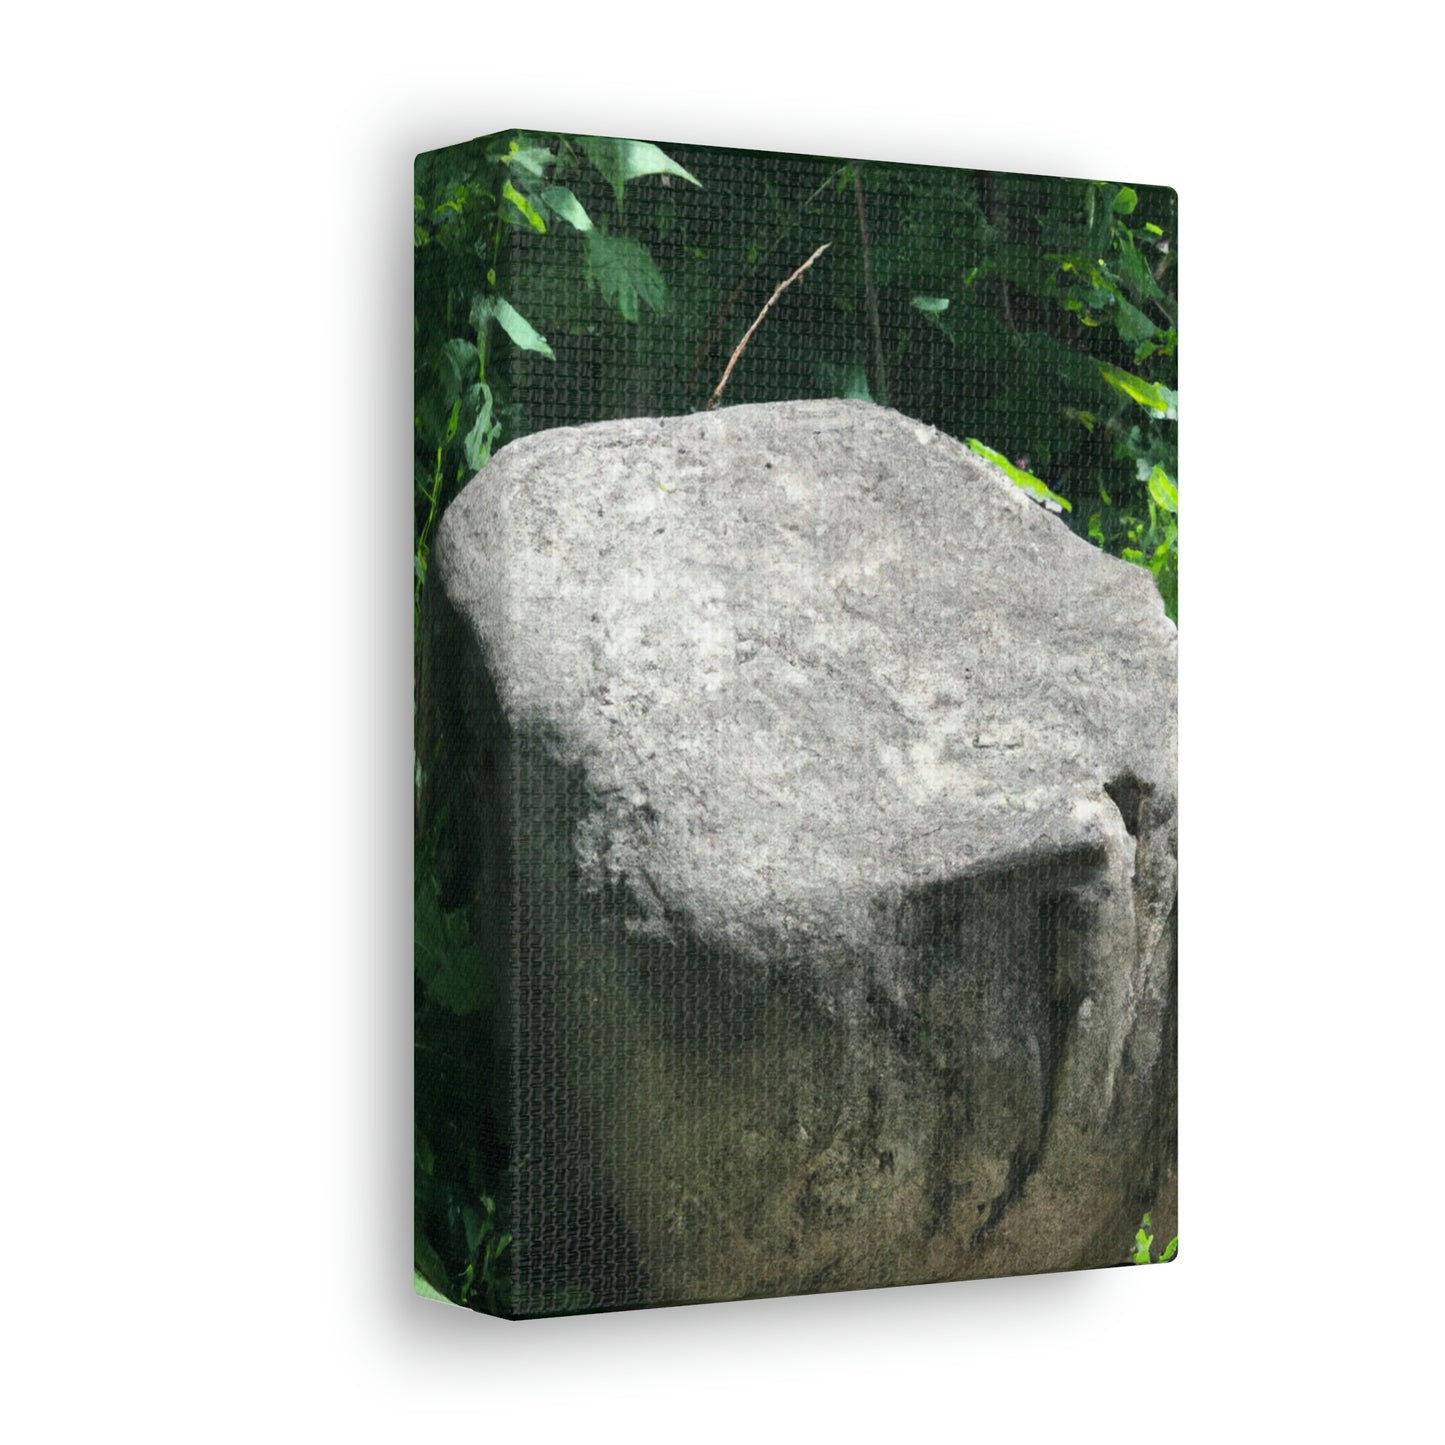 "The Whispering Stone" - The Alien Canva